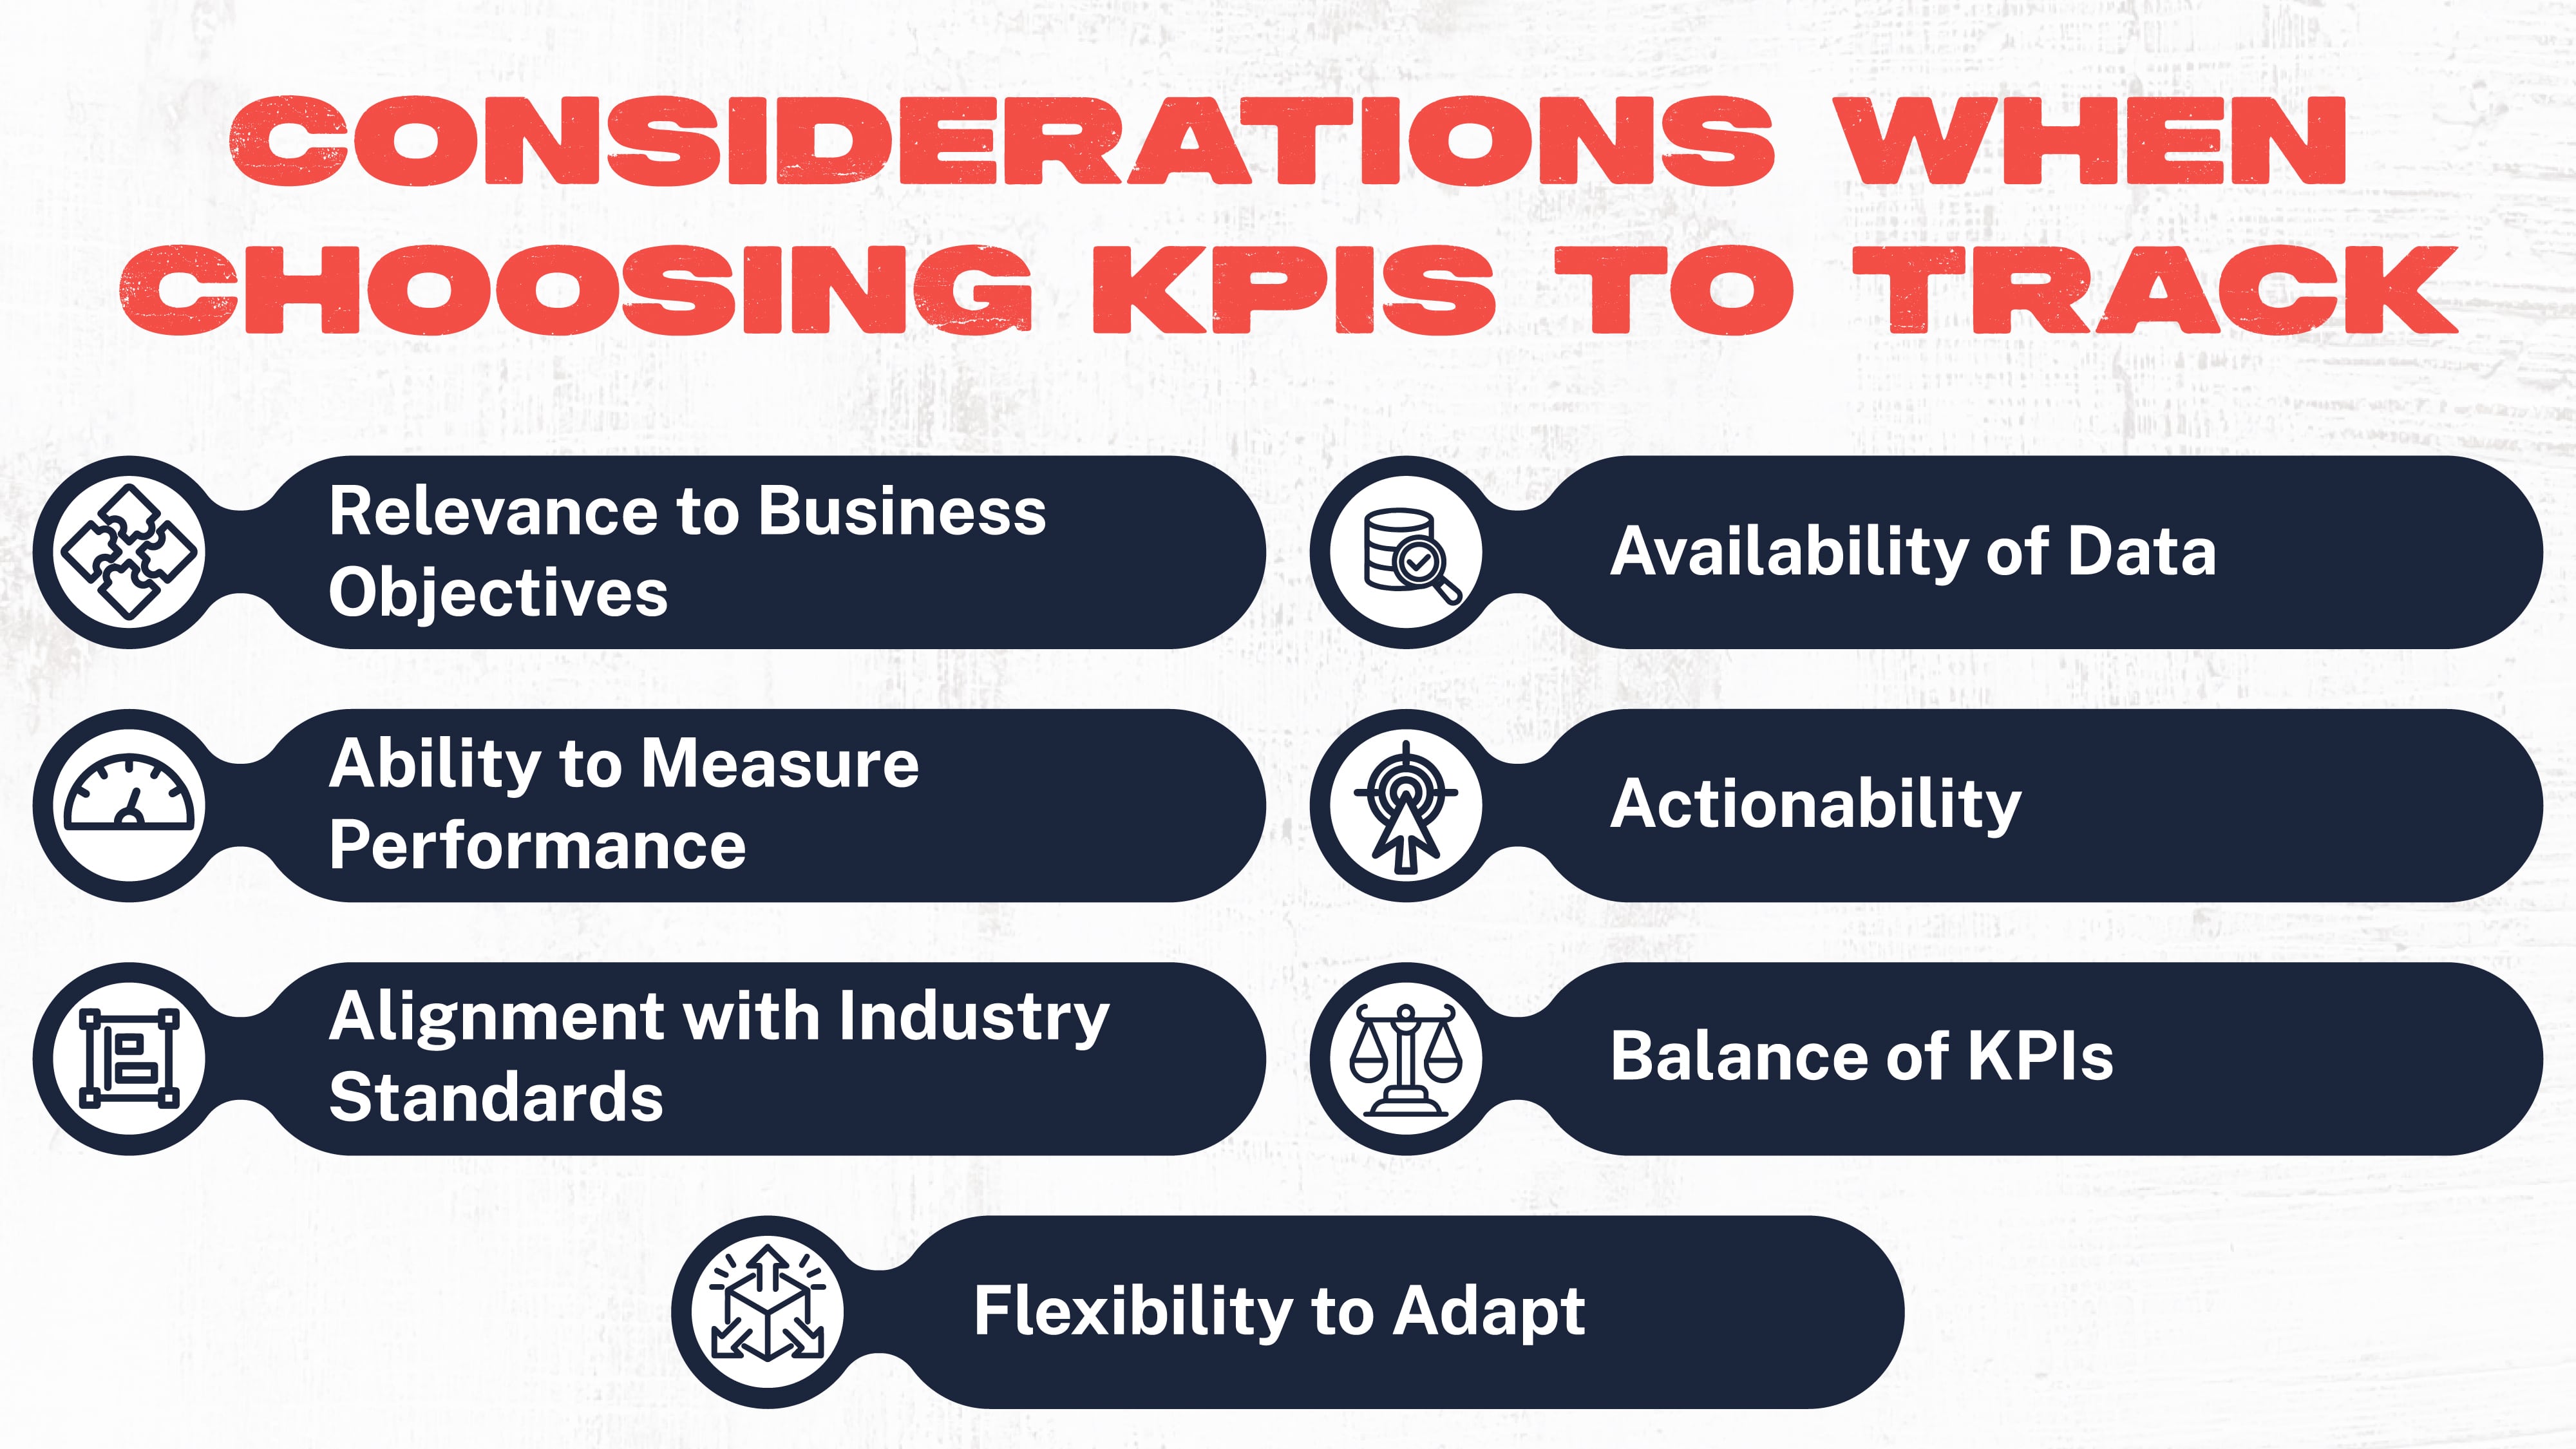 2 Considerations When Choosing KPIs to Track